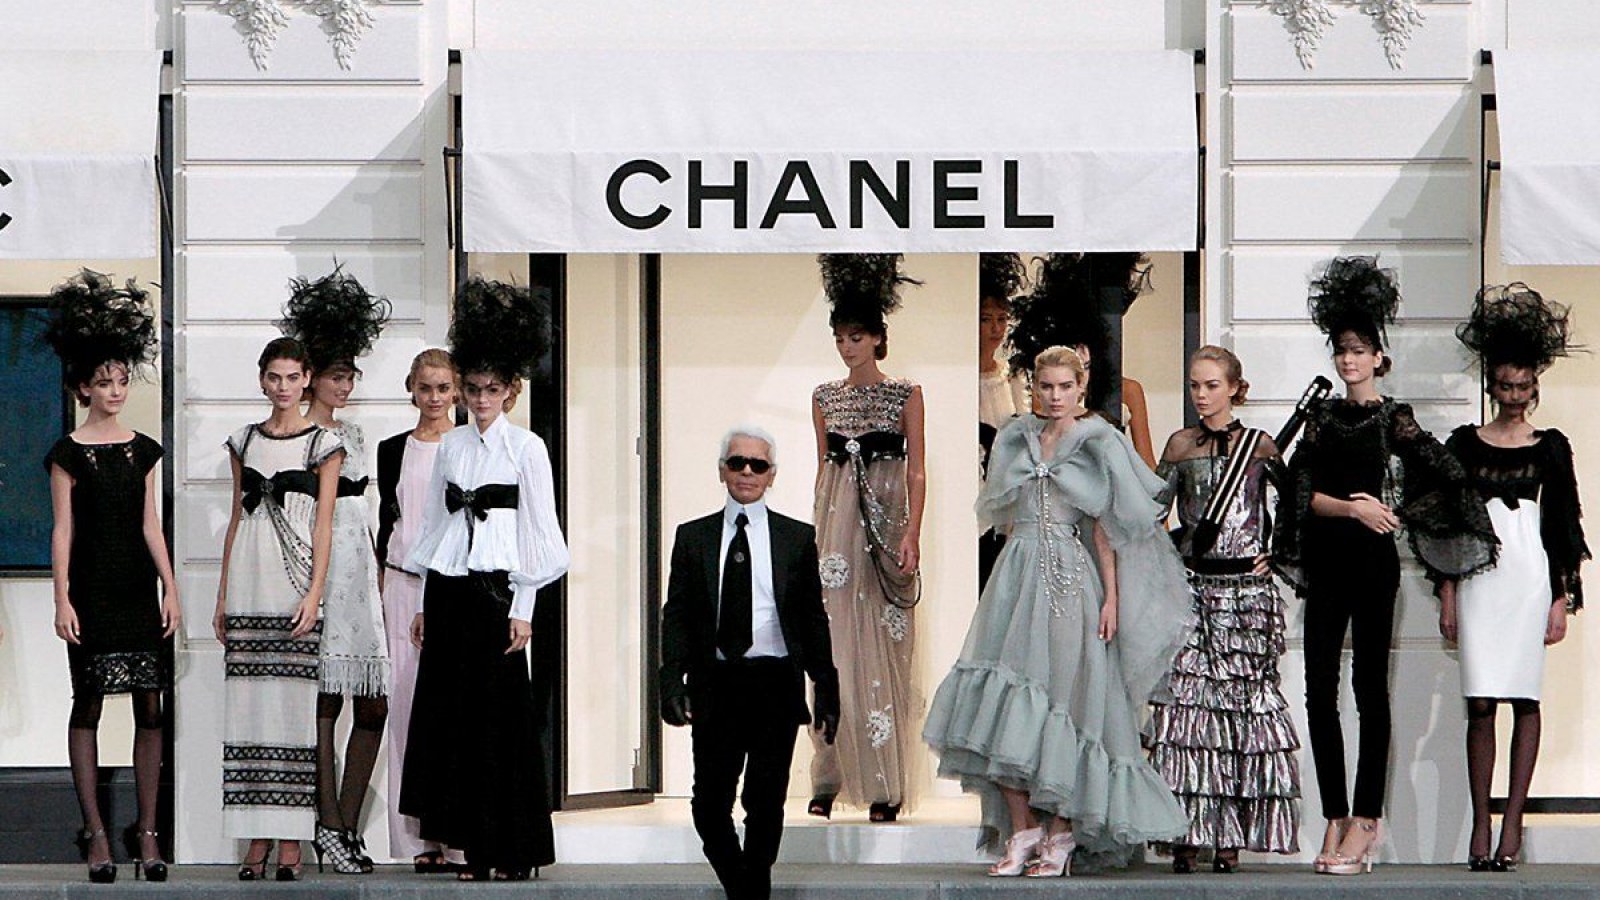 Fashion icon and Chanel boss Karl Lagerfeld dies aged 85